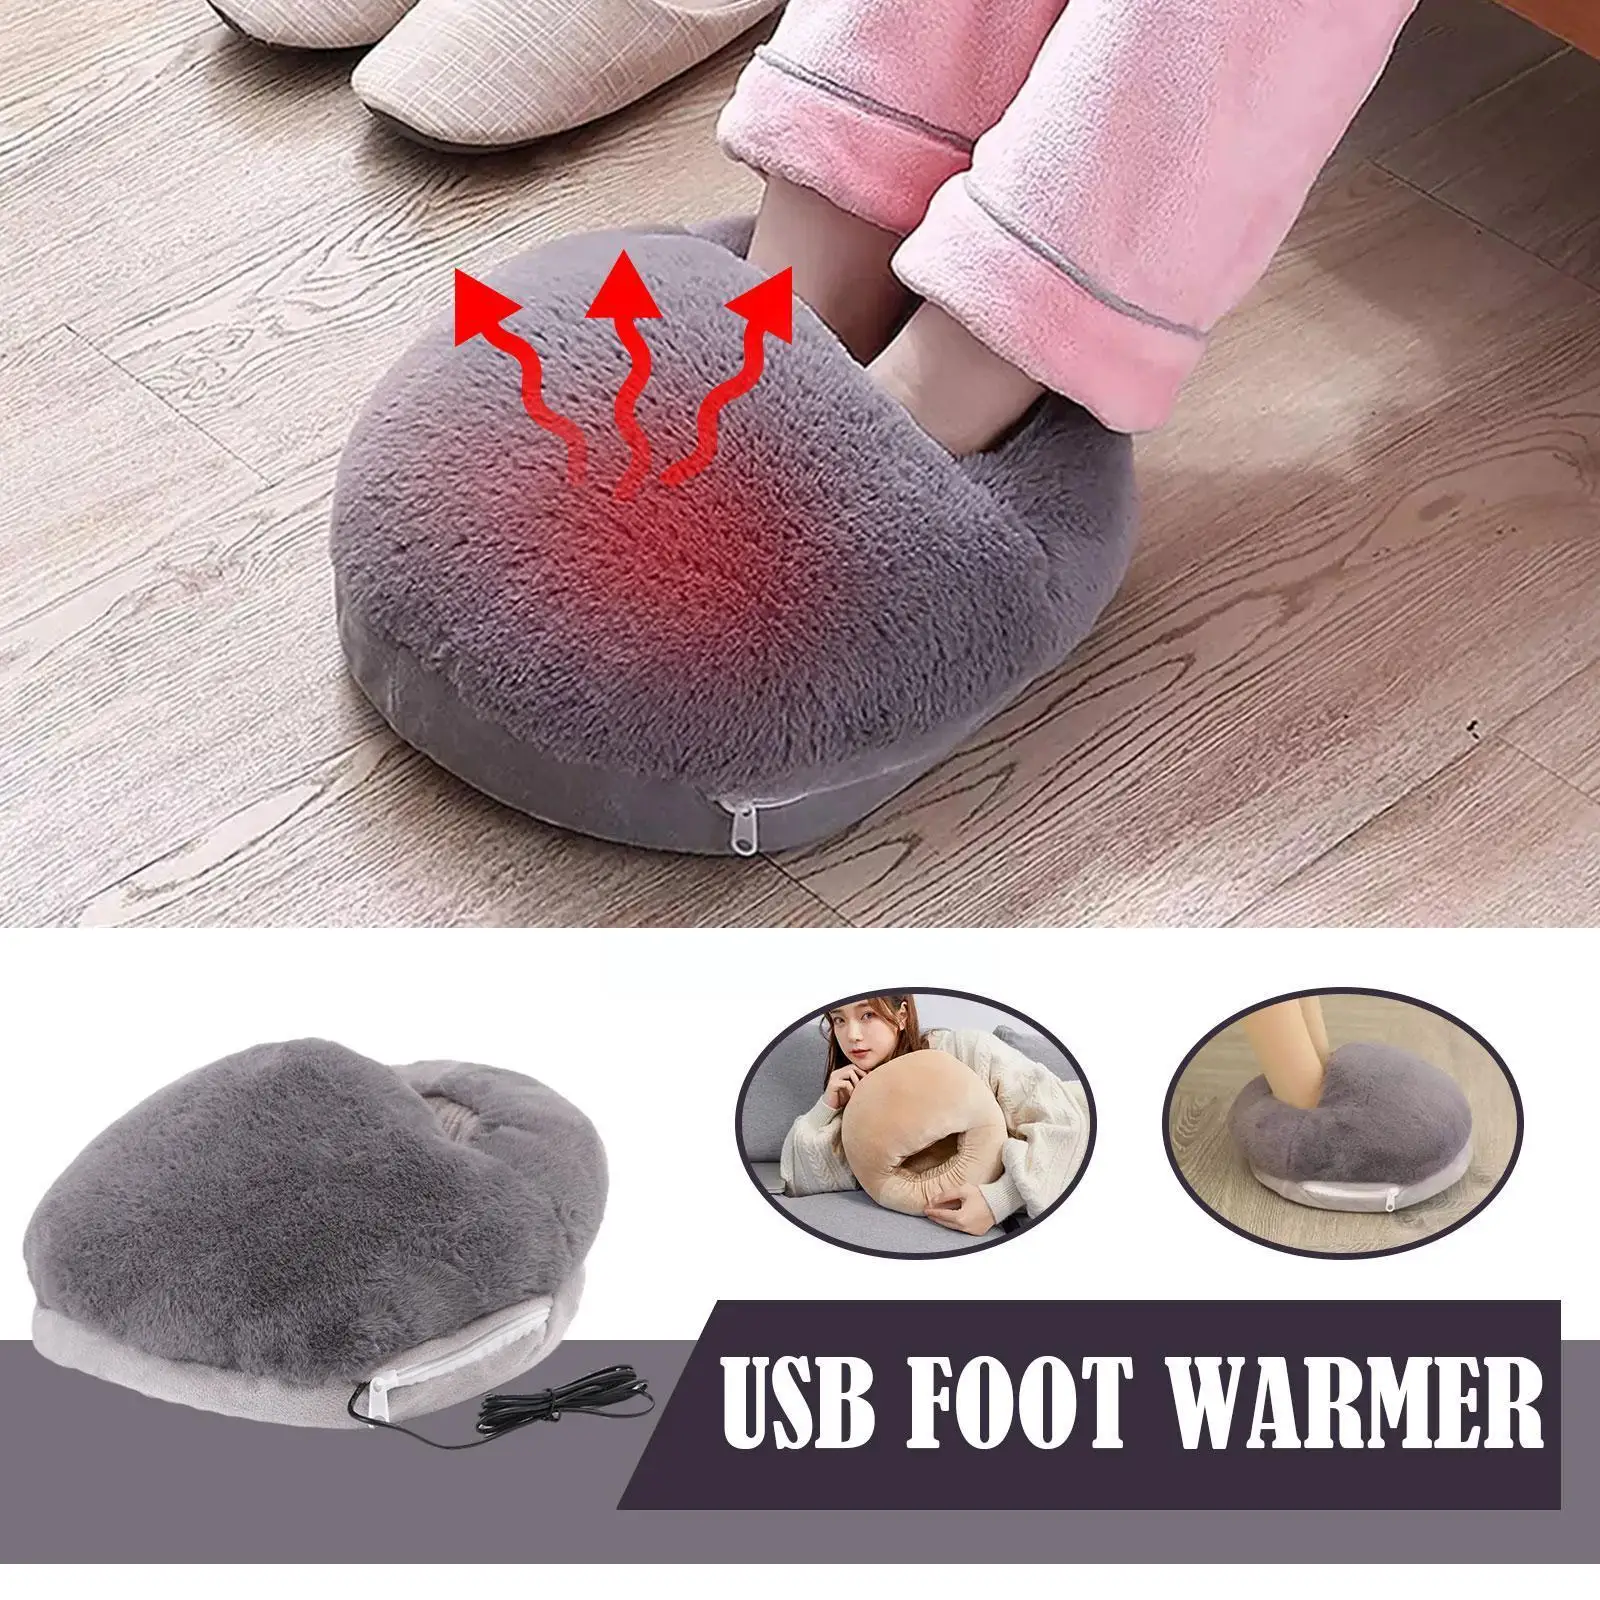 

Adjustable Temperature Usb Foot Warmers Removable Washable Plush Warmer Cute Foot Warmth Slippers Winter Accessories N6y7